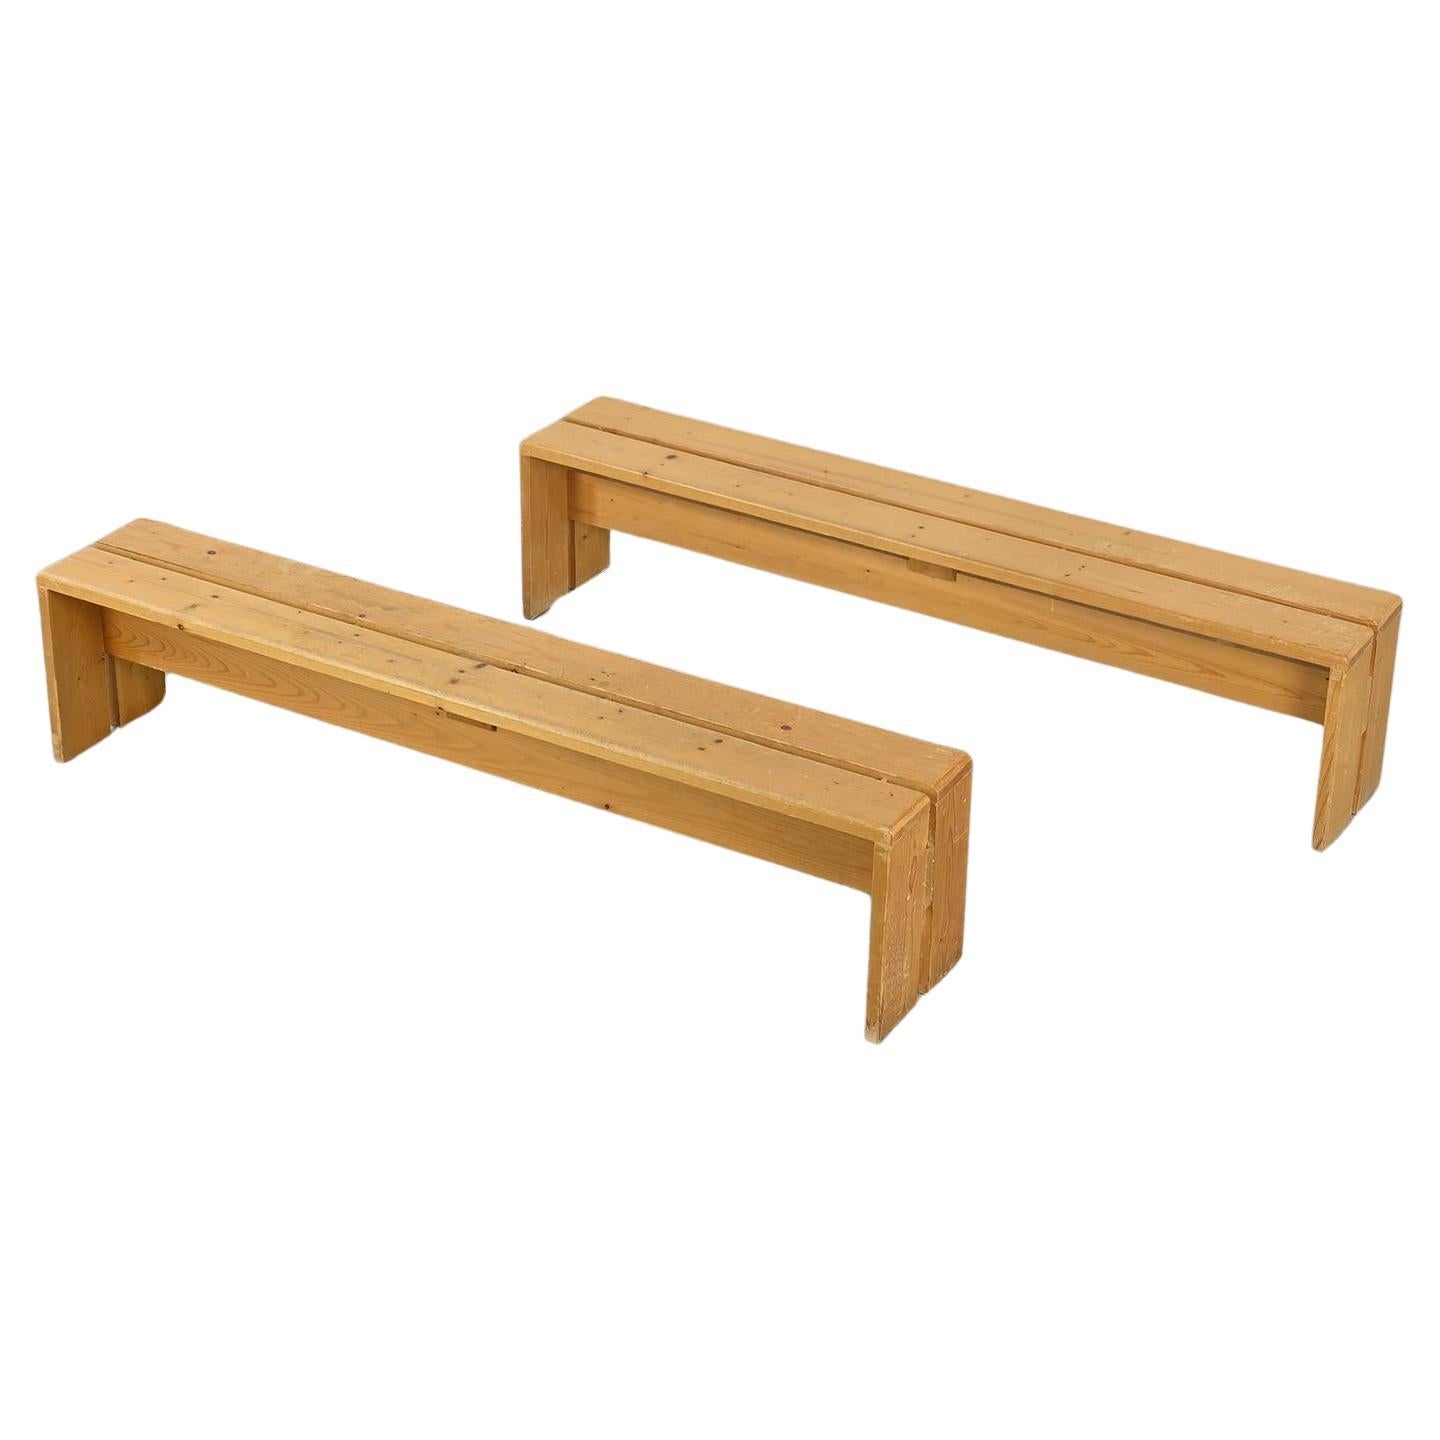  Solid Pine Benches from Les Arcs, France, circa 1973 